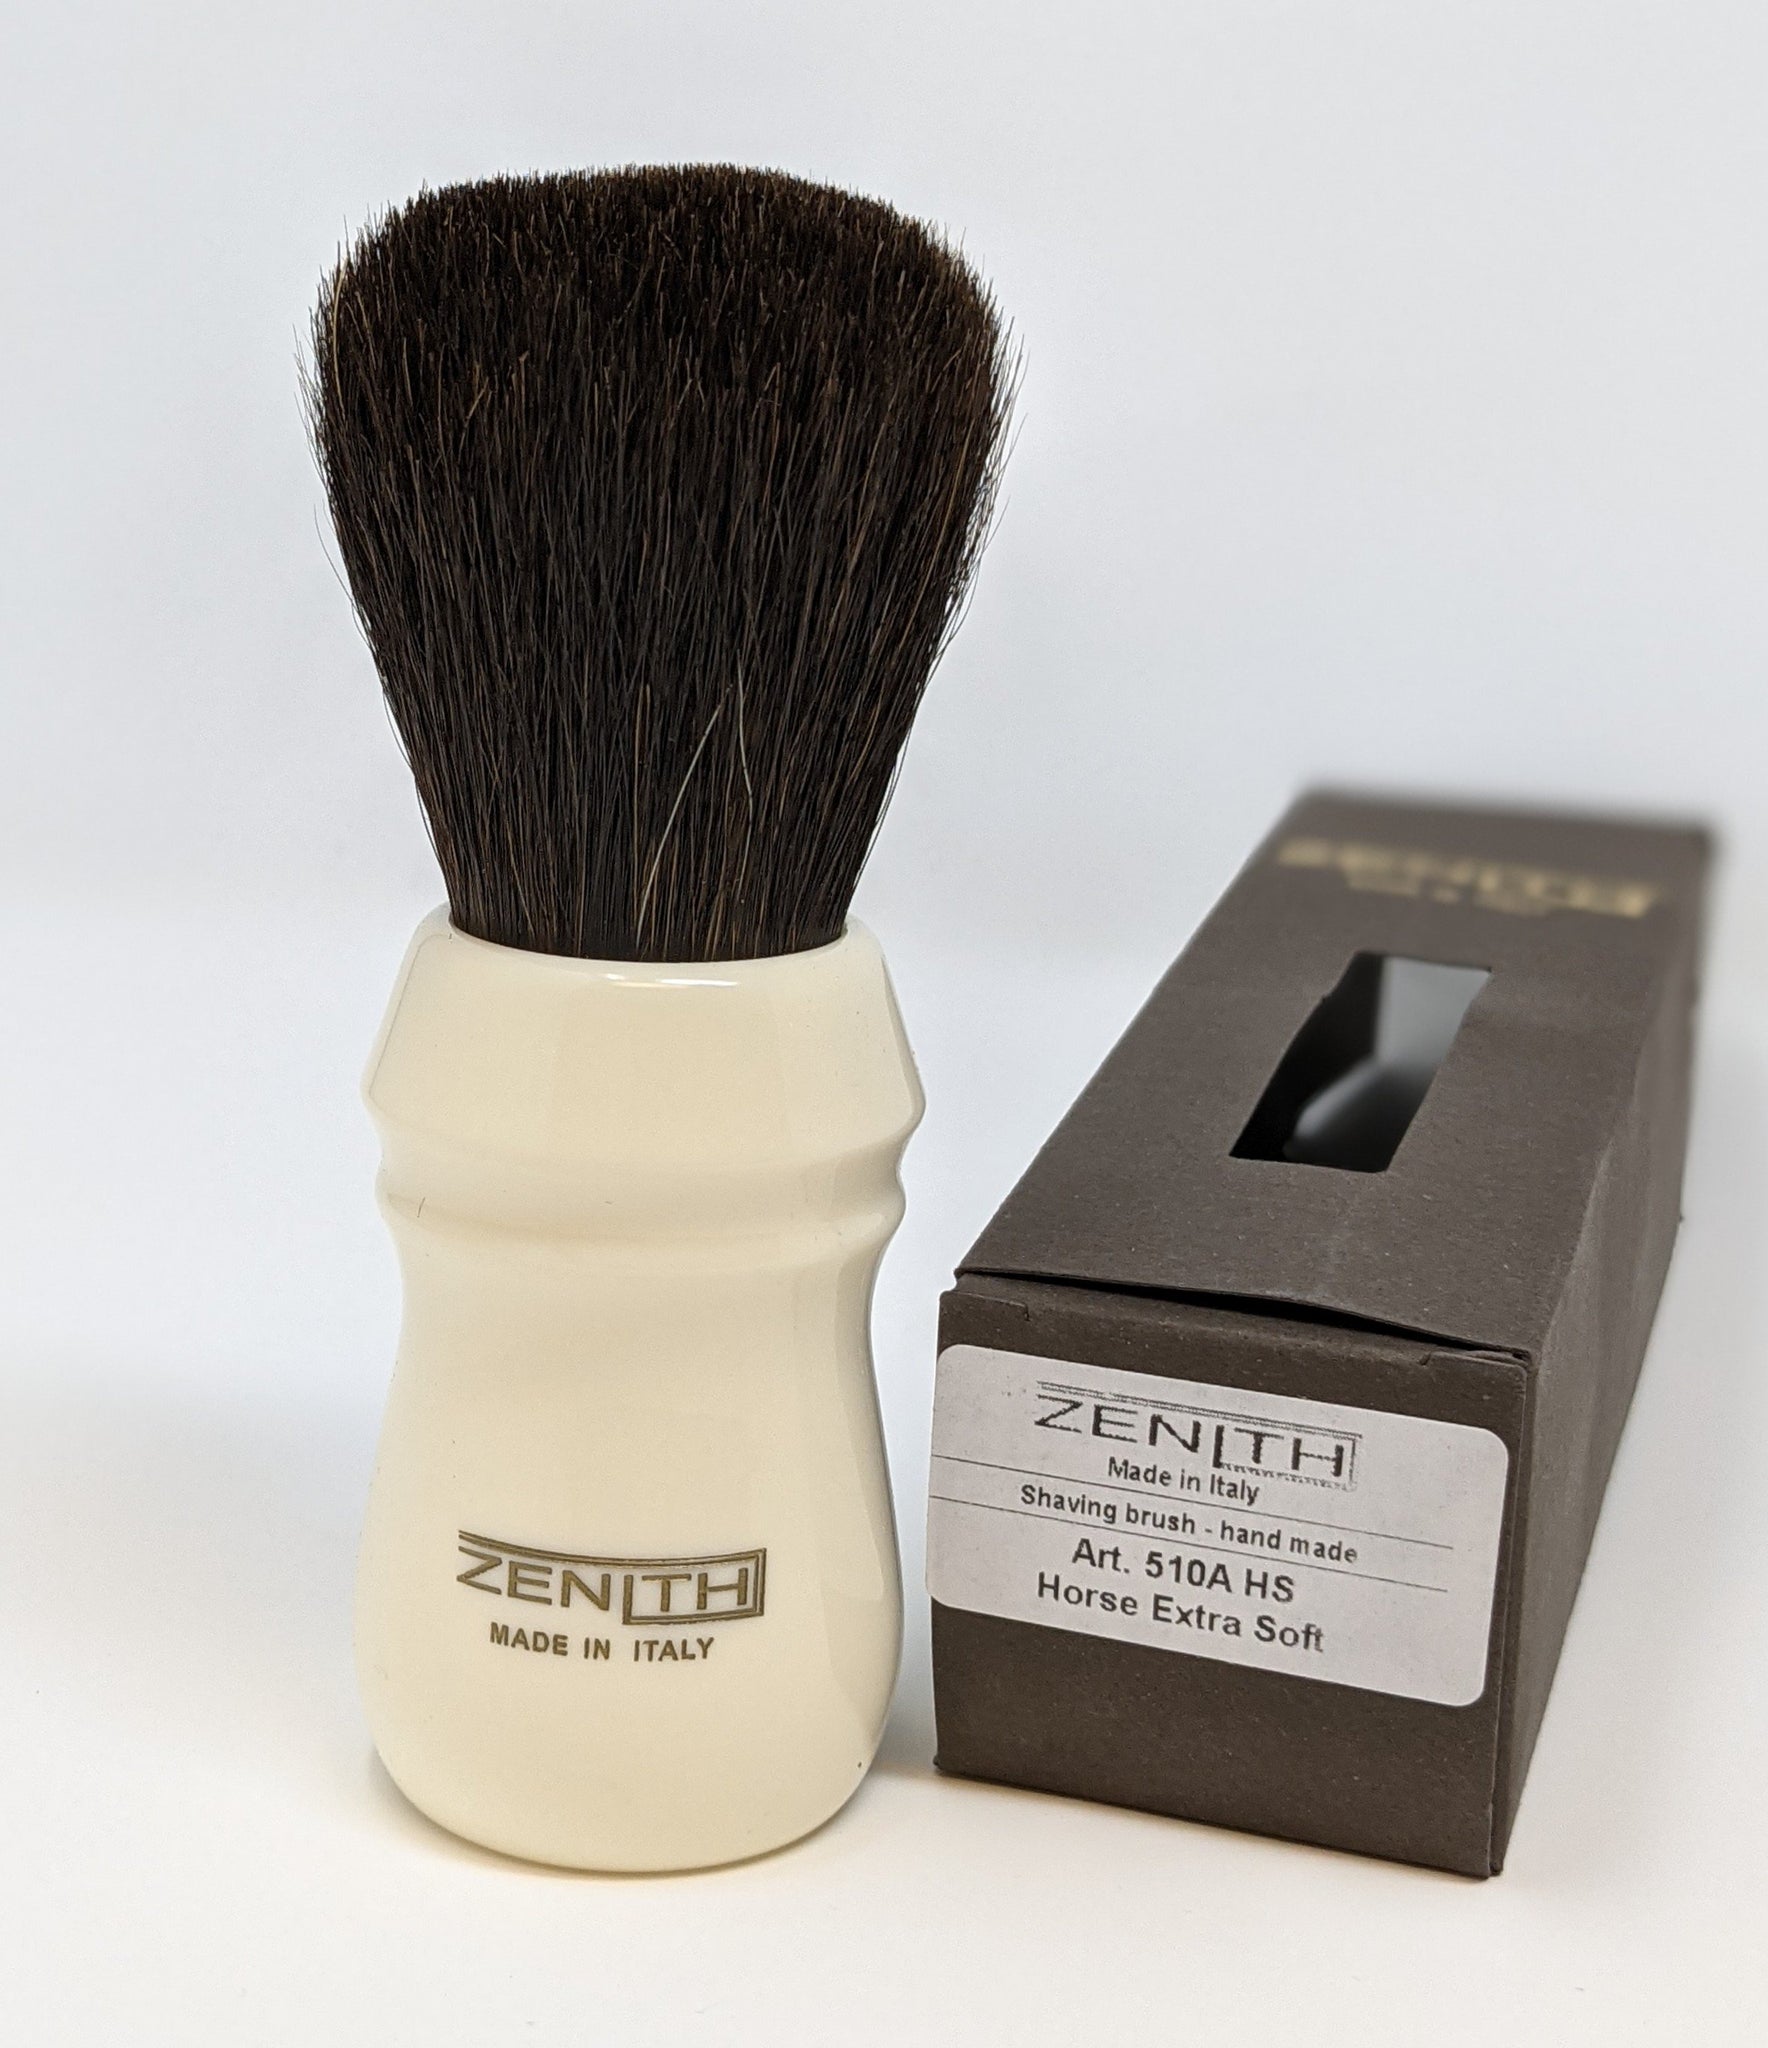 Extra Soft Horse Hair Brush w/Italian Barber Handle in Resin by Zenith –  The Gentle Shave